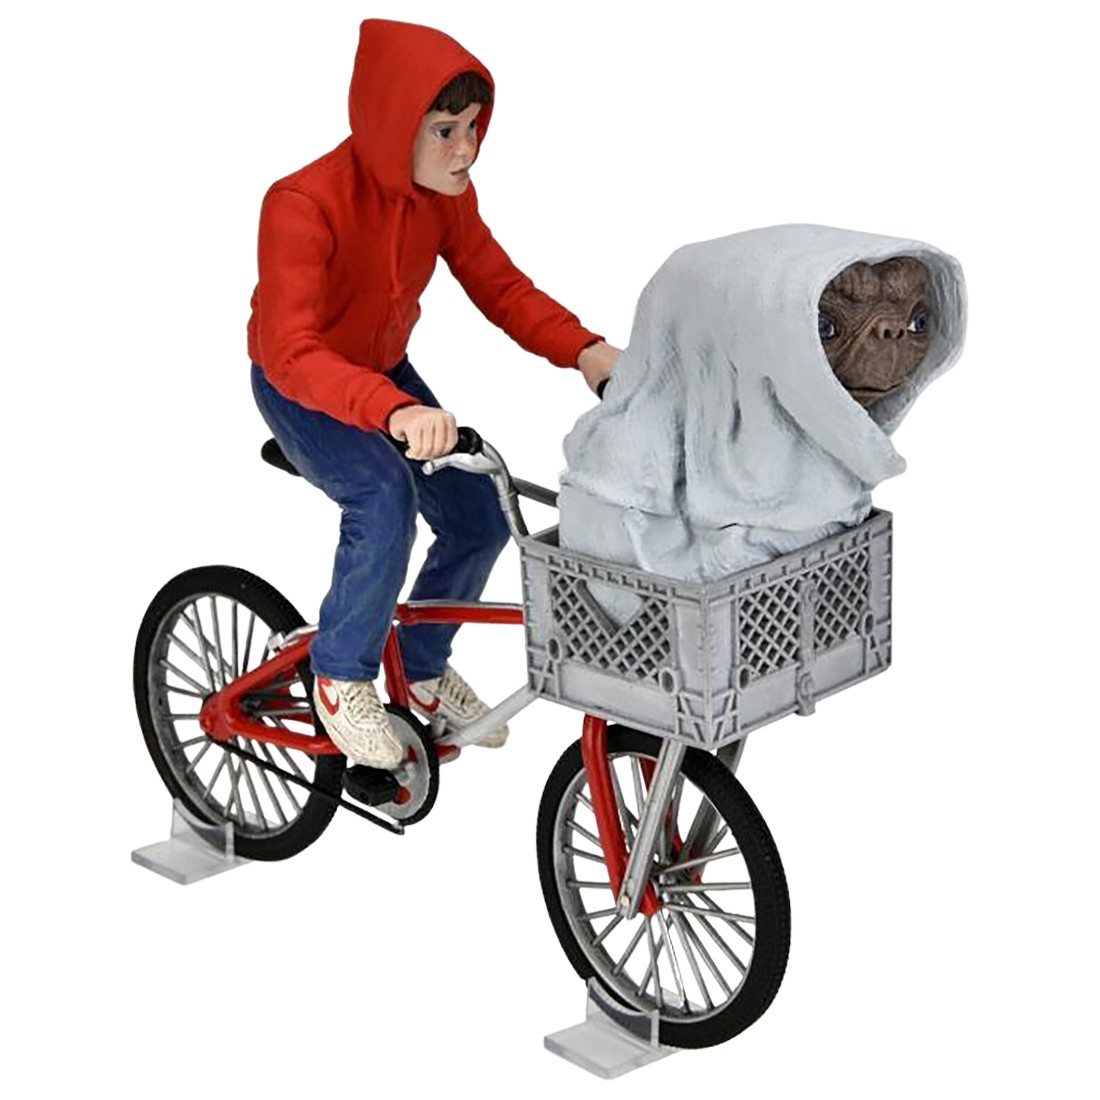 NECA E.T. 40th Anniversary Elliott And E.T. On Bicycle 7 Inch Scale Action Figure (red)